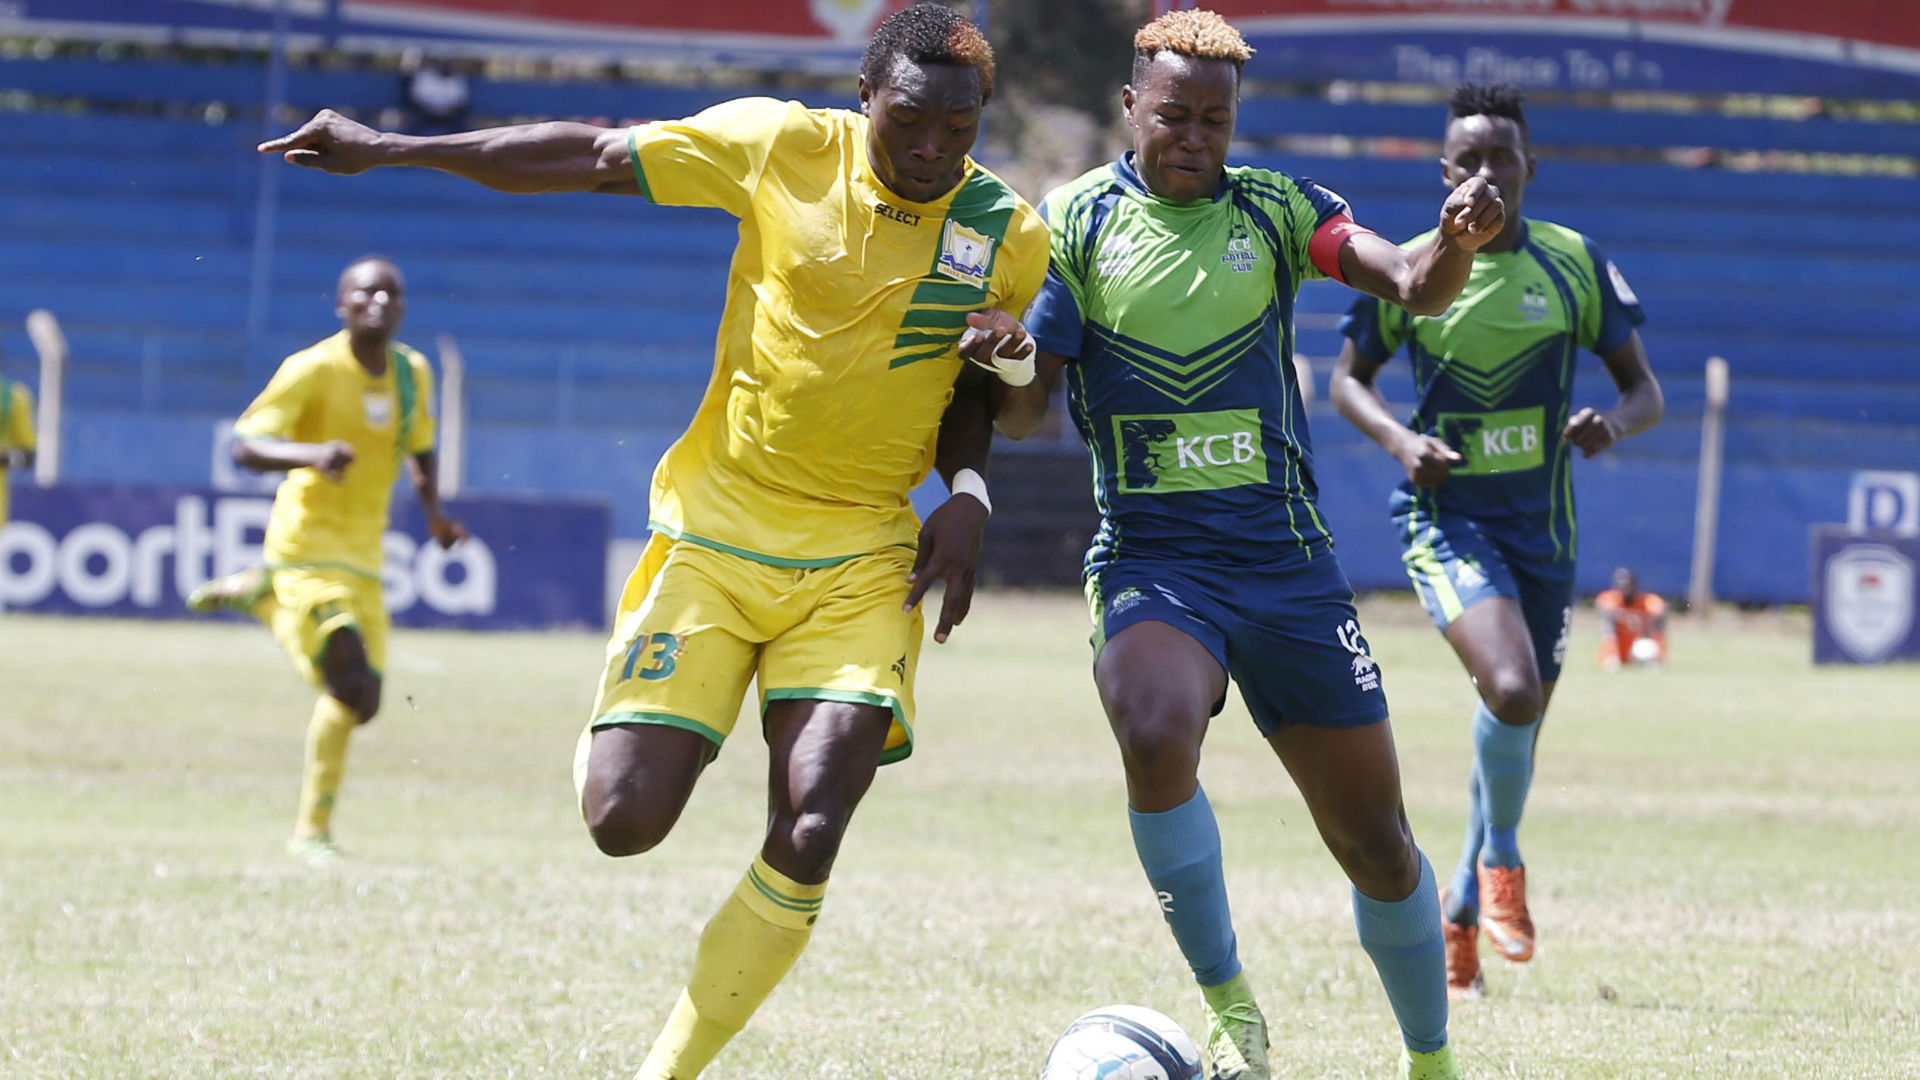 Revealed: Sofapaka FC's failed move to lure Kibwage as Musa replacement